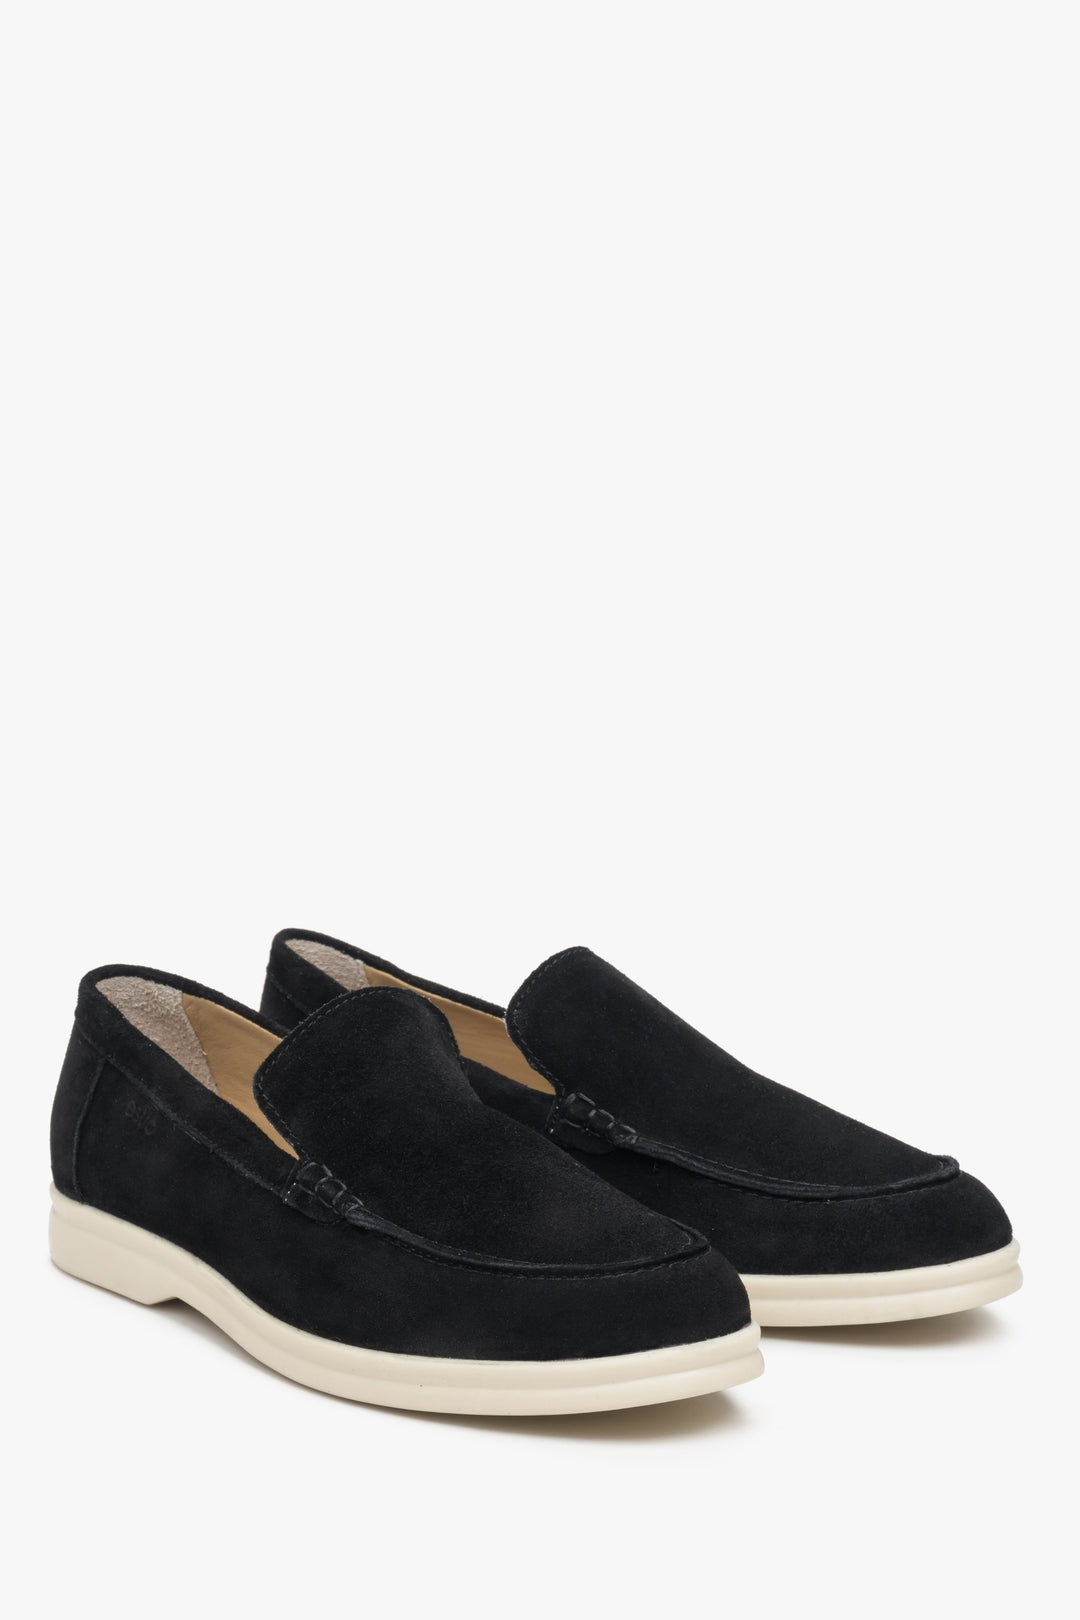 Women's classic black velour loafers.